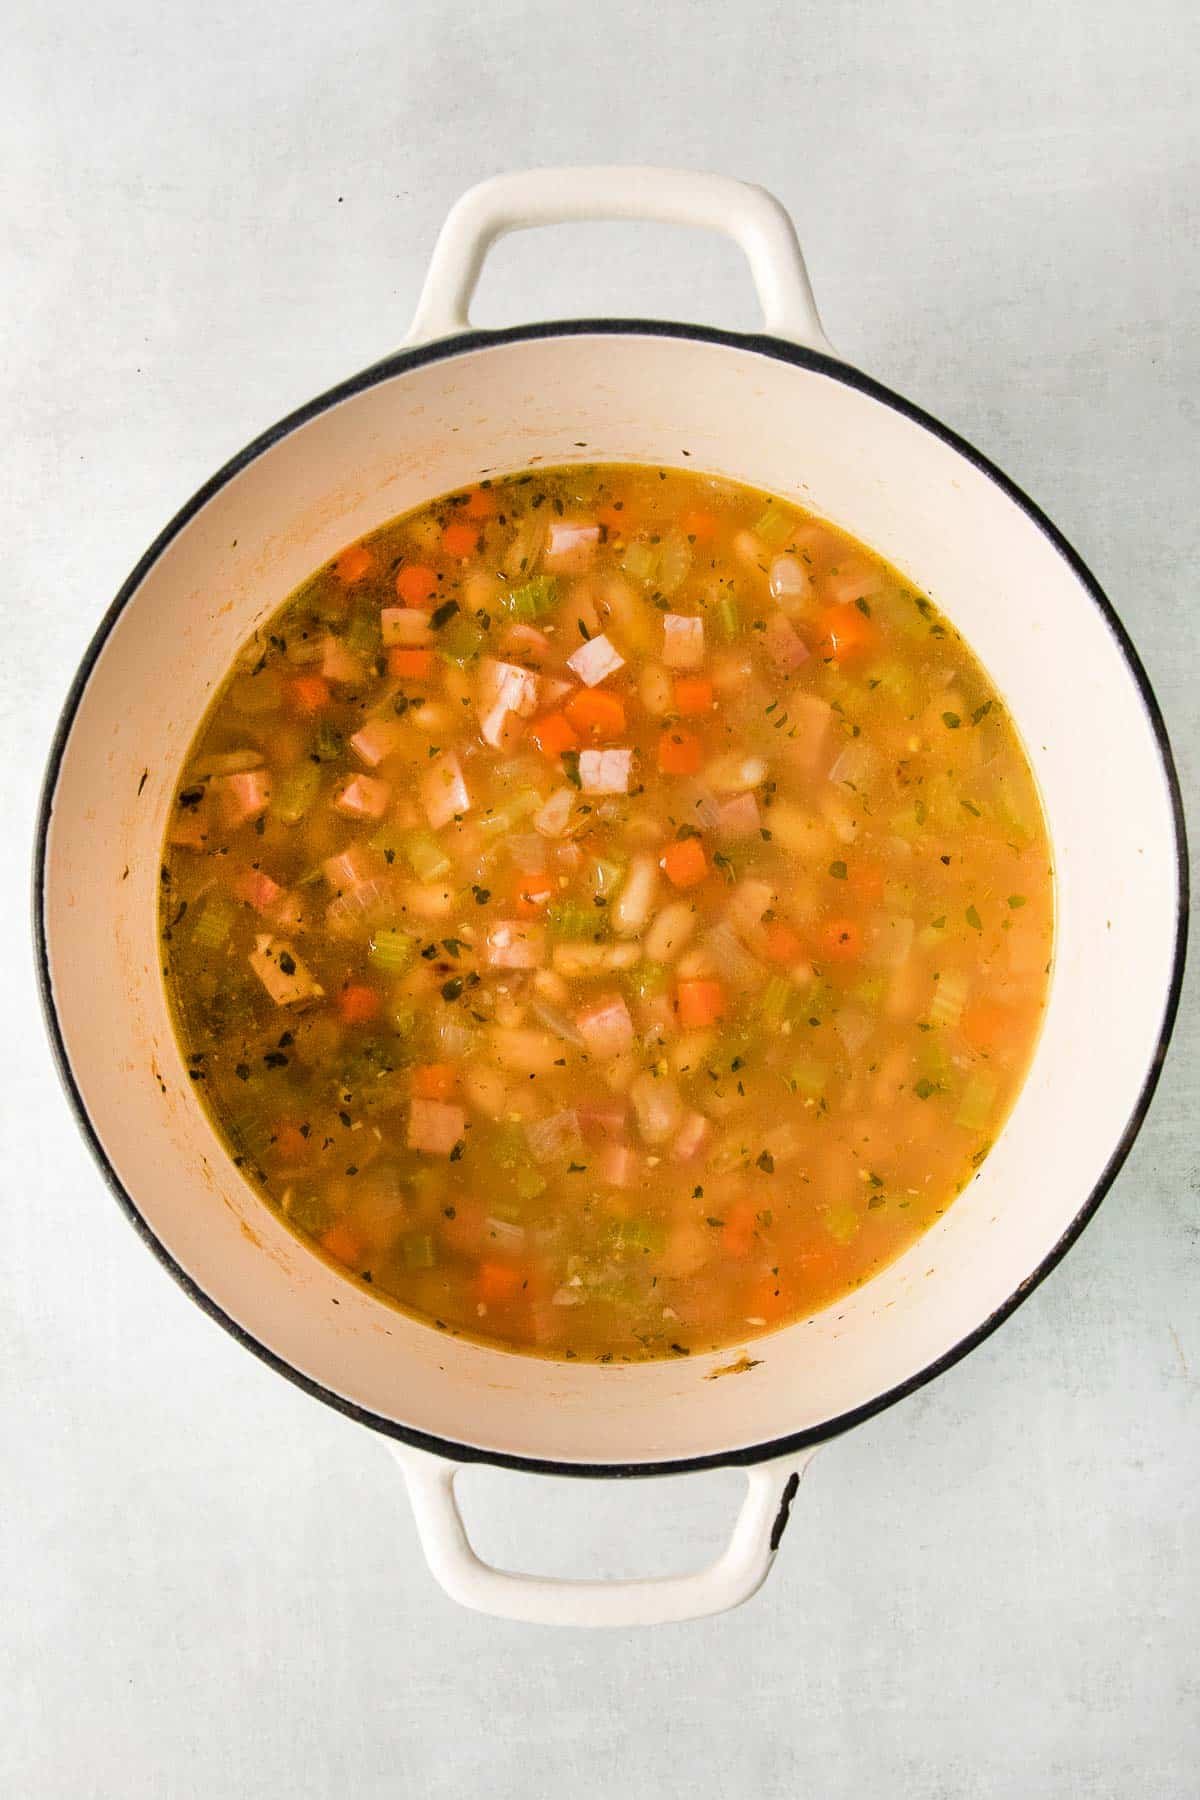 white stock pot with chicken broth with diced carrots, celery and onions.